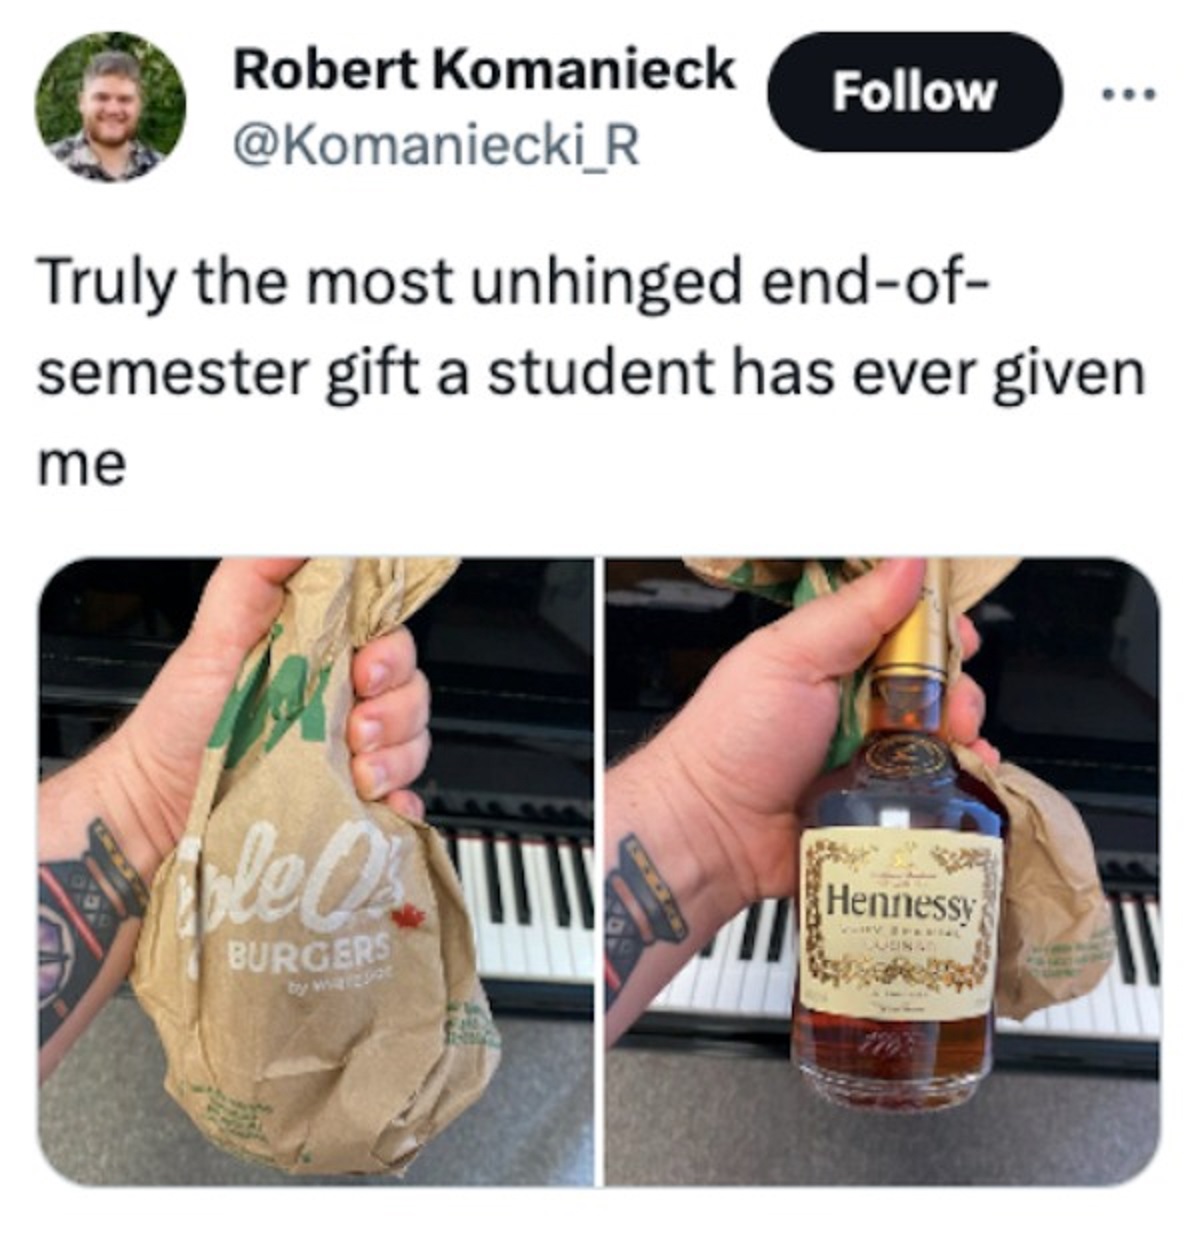 bottle - Robert Komanieck Truly the most unhinged endof semester gift a student has ever given me ble Ca Burgers Hennessy Varv Sprevial Alinan